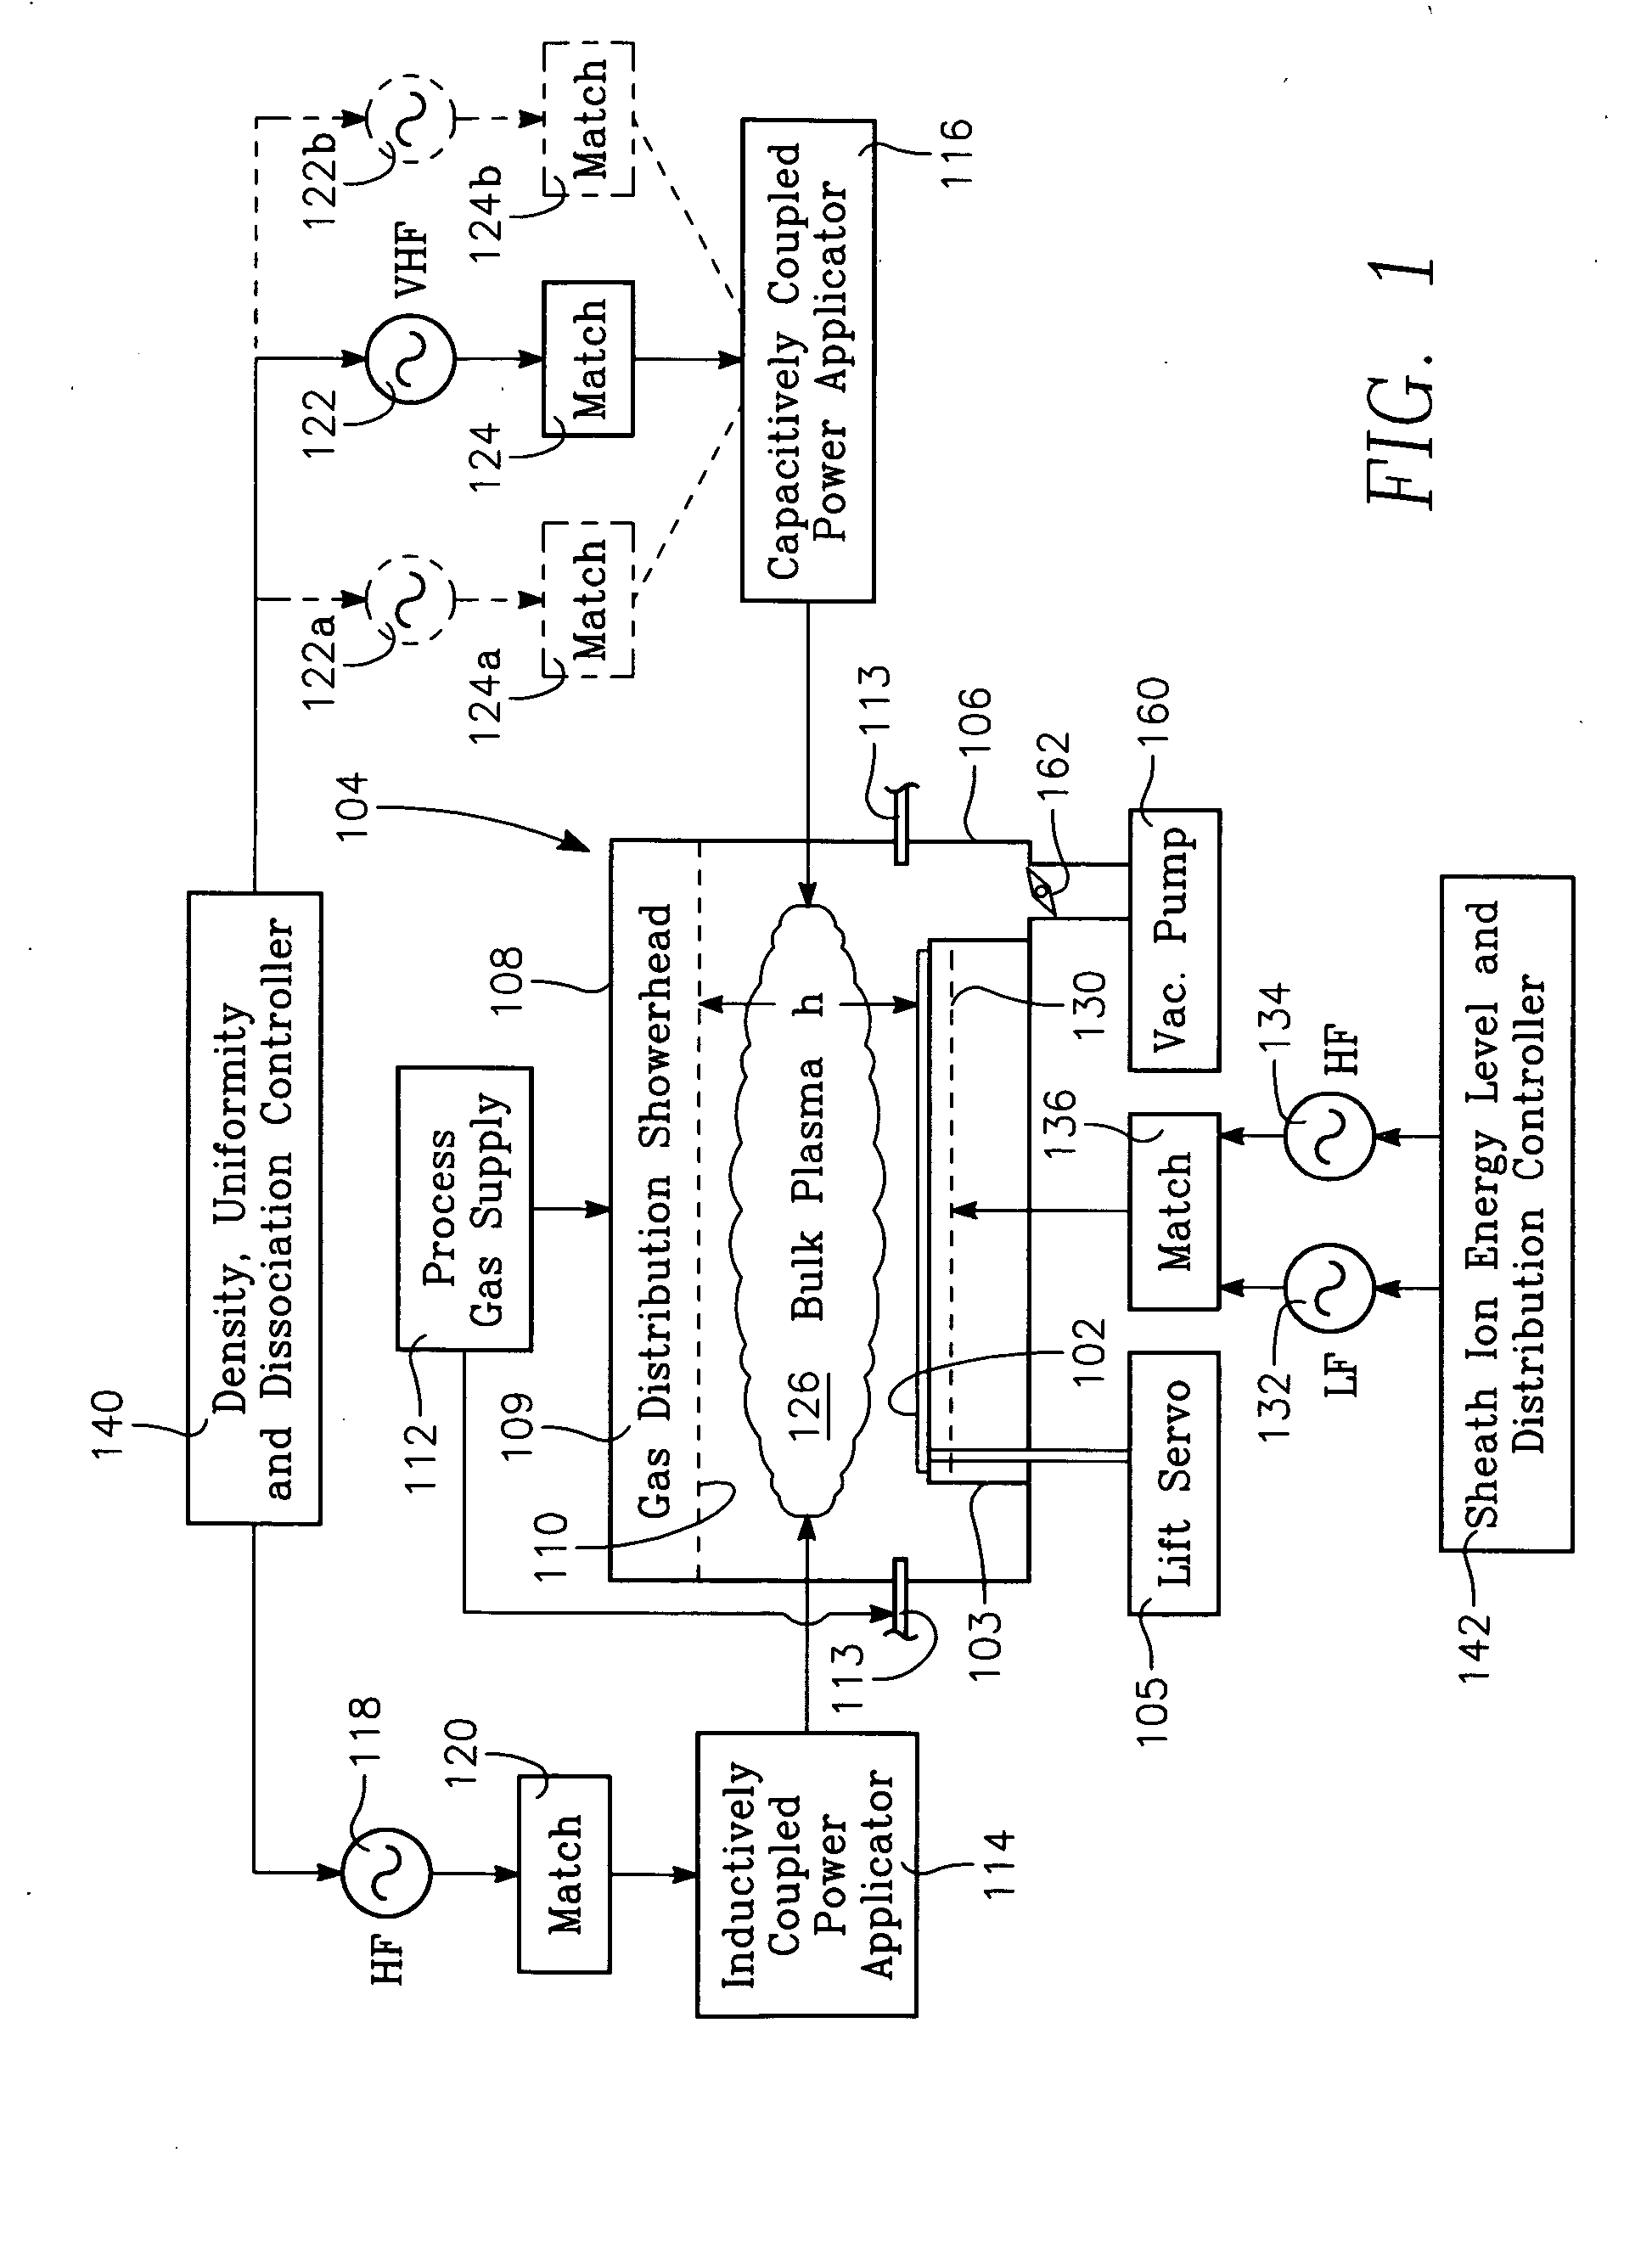 Plasma reactor apparatus with independent capacitive and inductive plasma sources